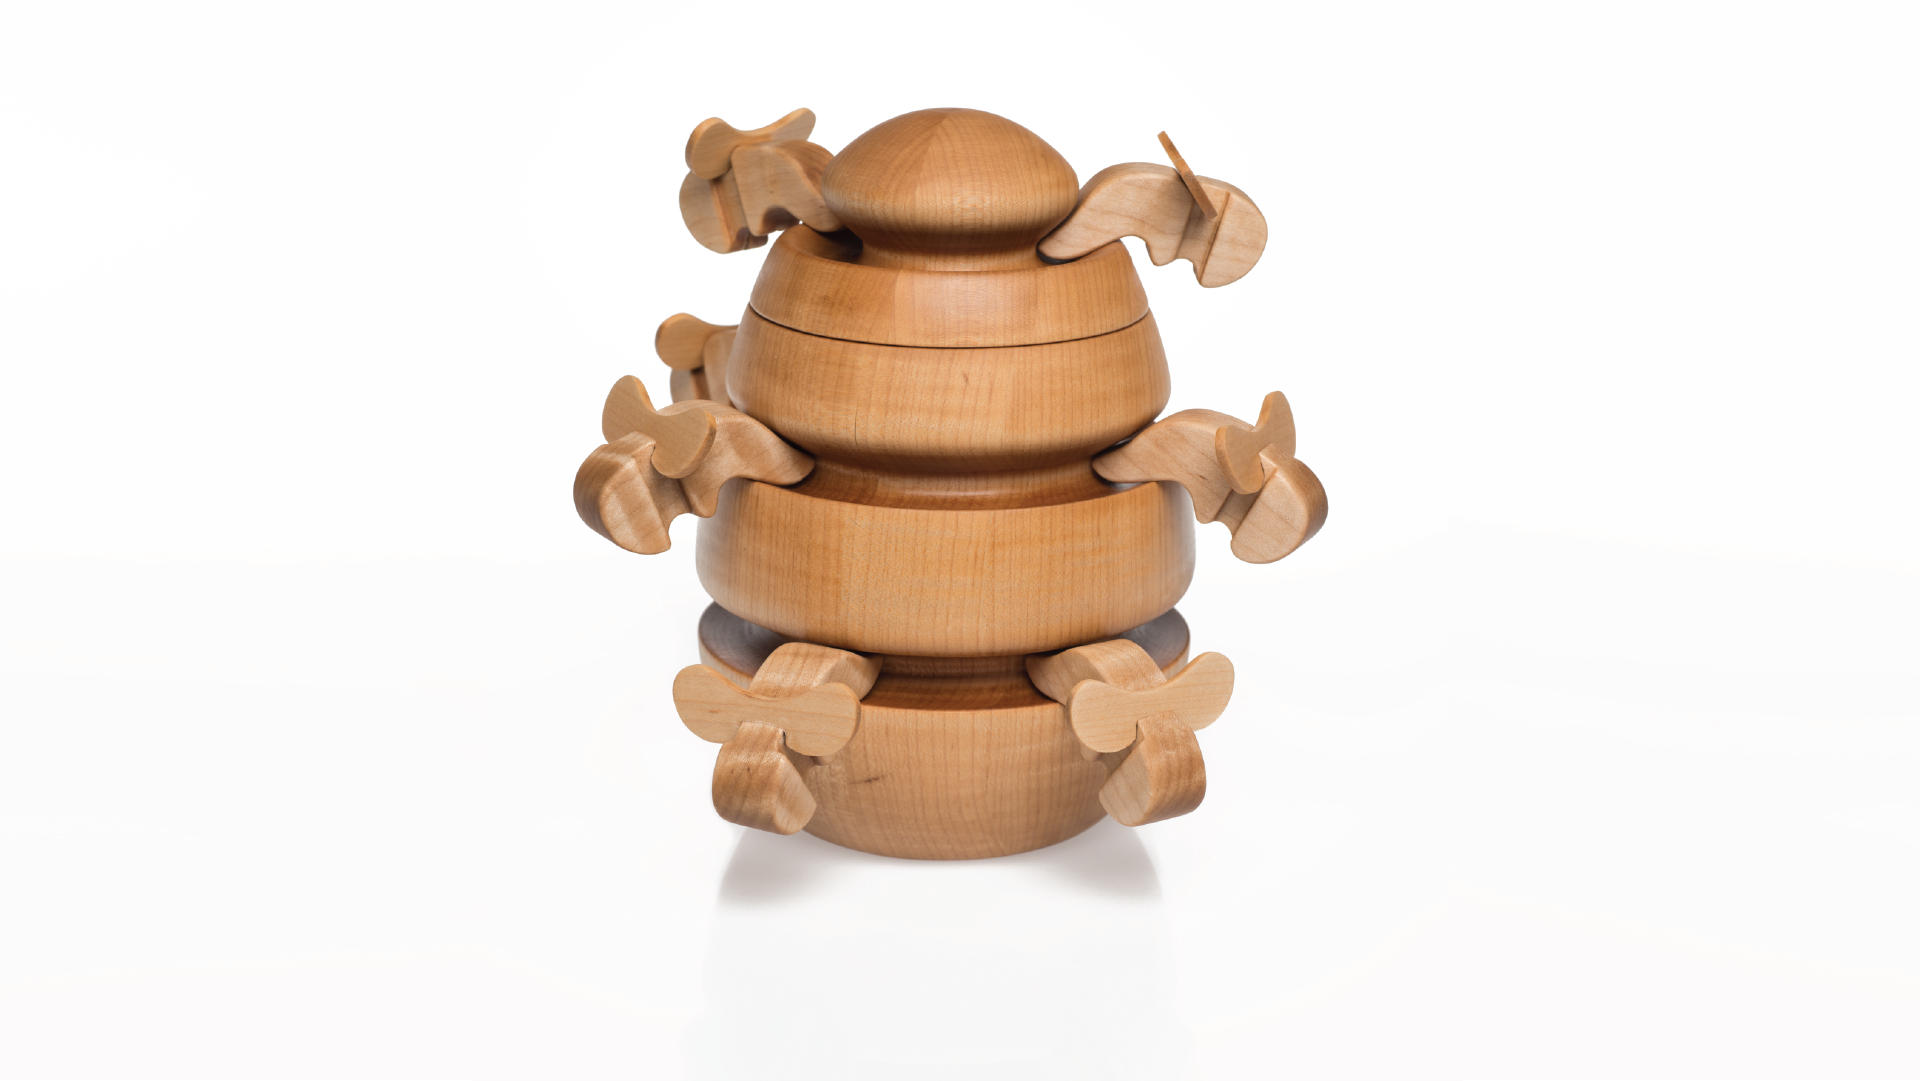 Wooden vessel that represents a beehive with wooden bees hanging from the outside.